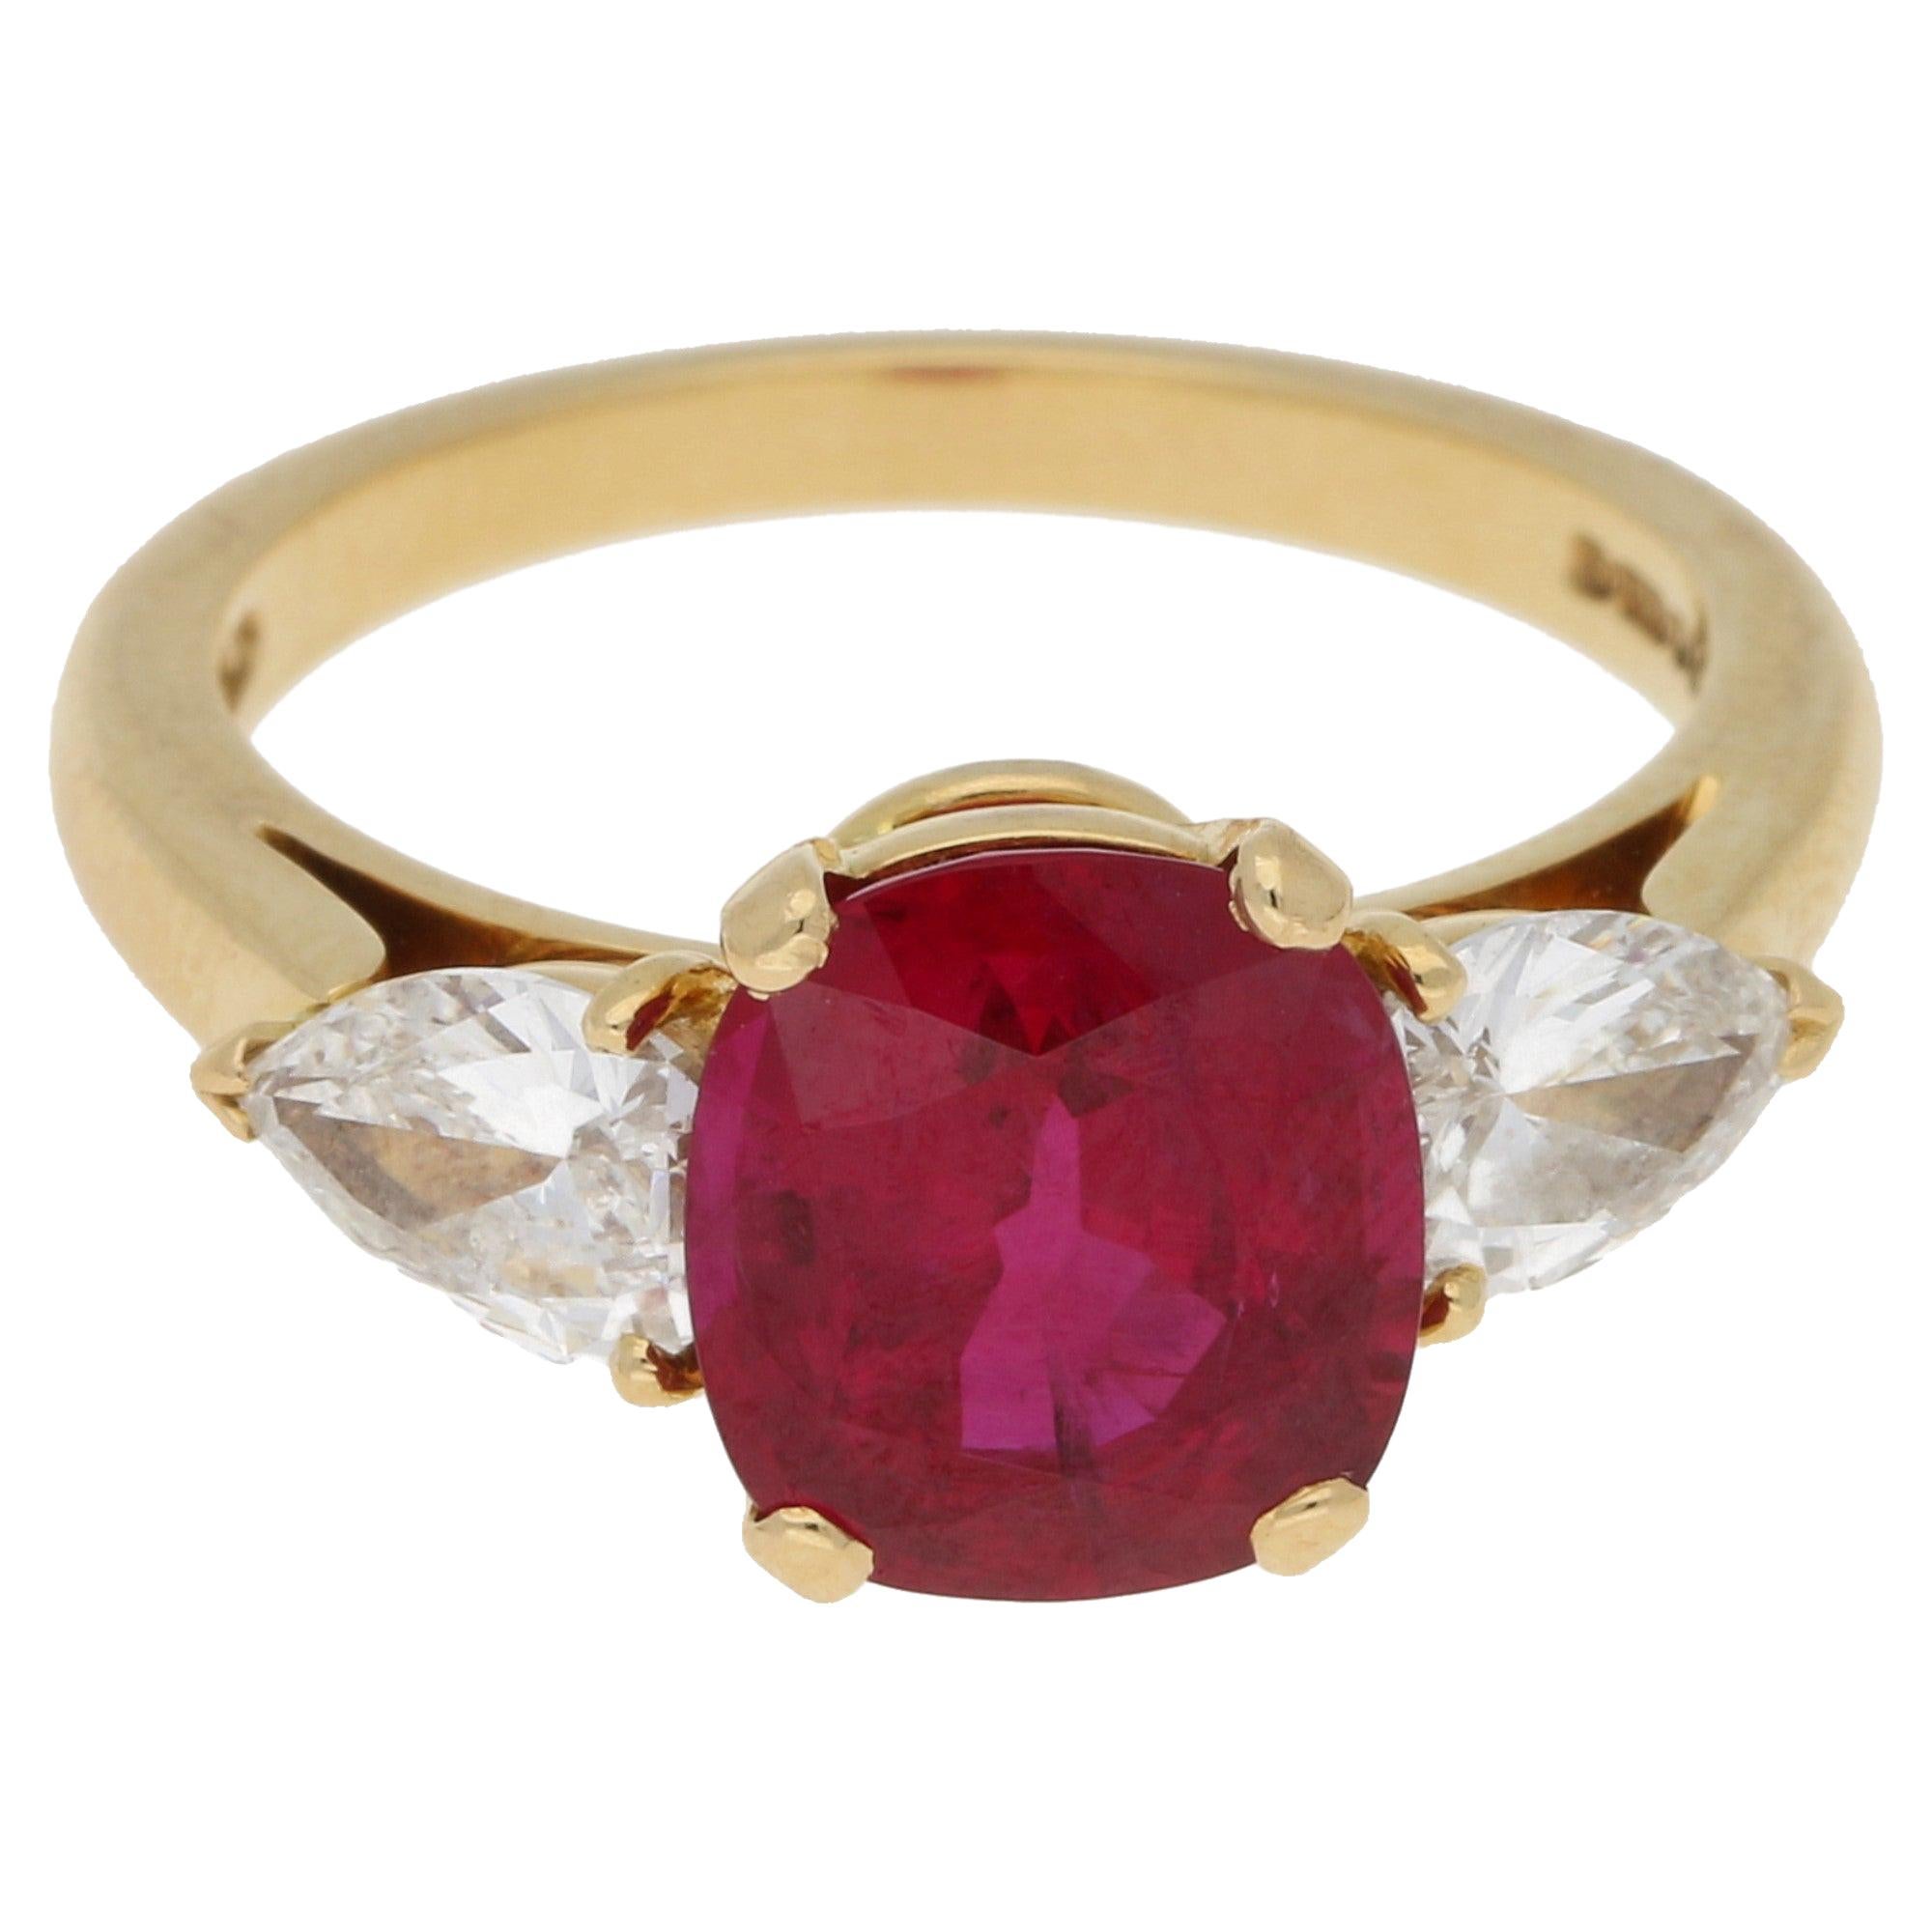 Burmese Ruby and Flawless Diamond Engagement Ring in 18k Yellow Gold